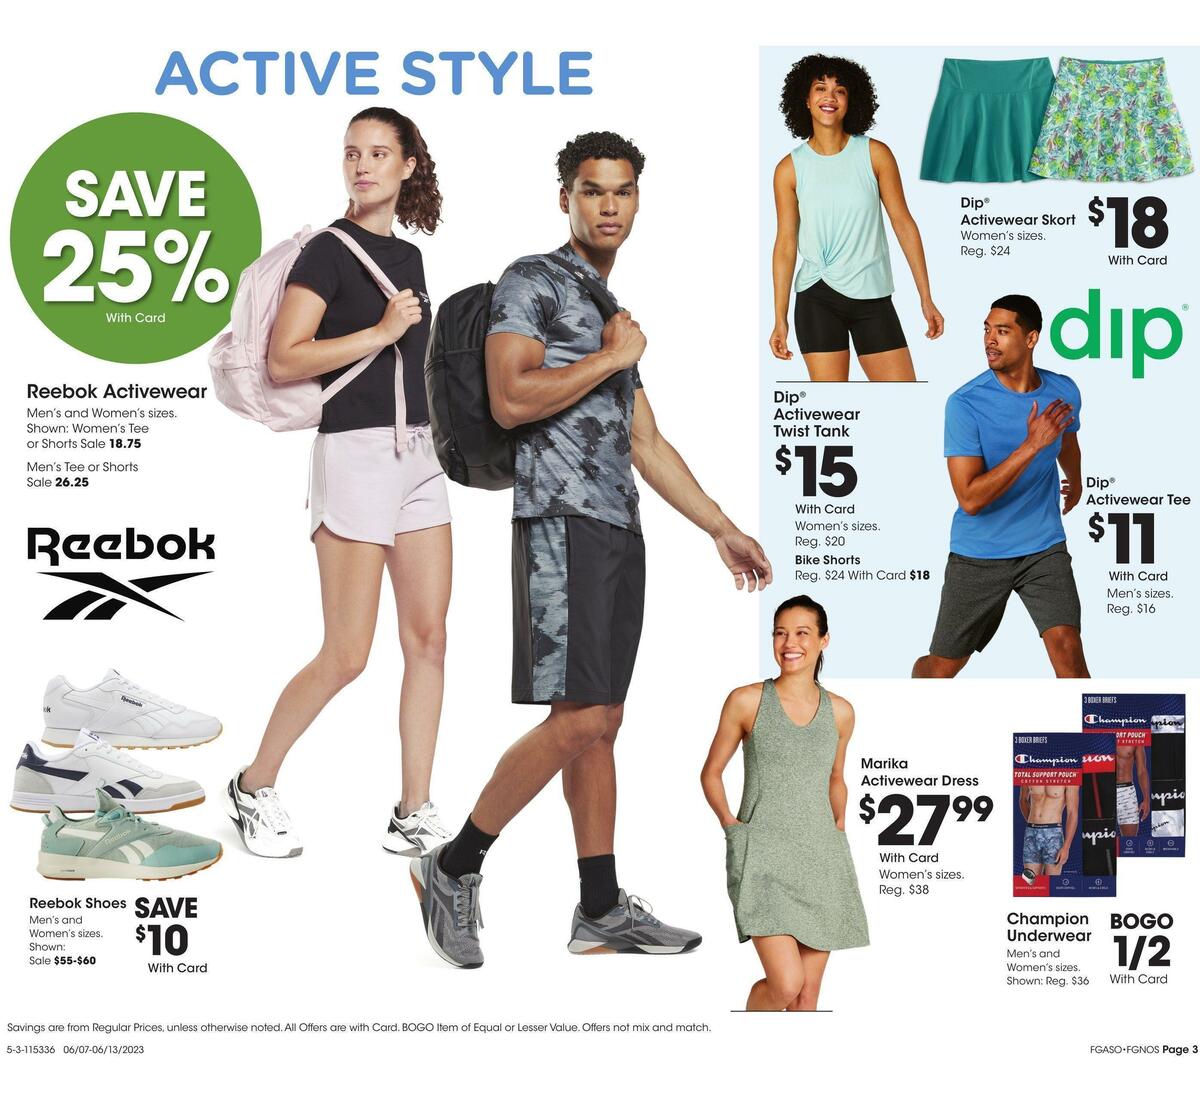 Fred Meyer General Merchandise Weekly Ad from June 7